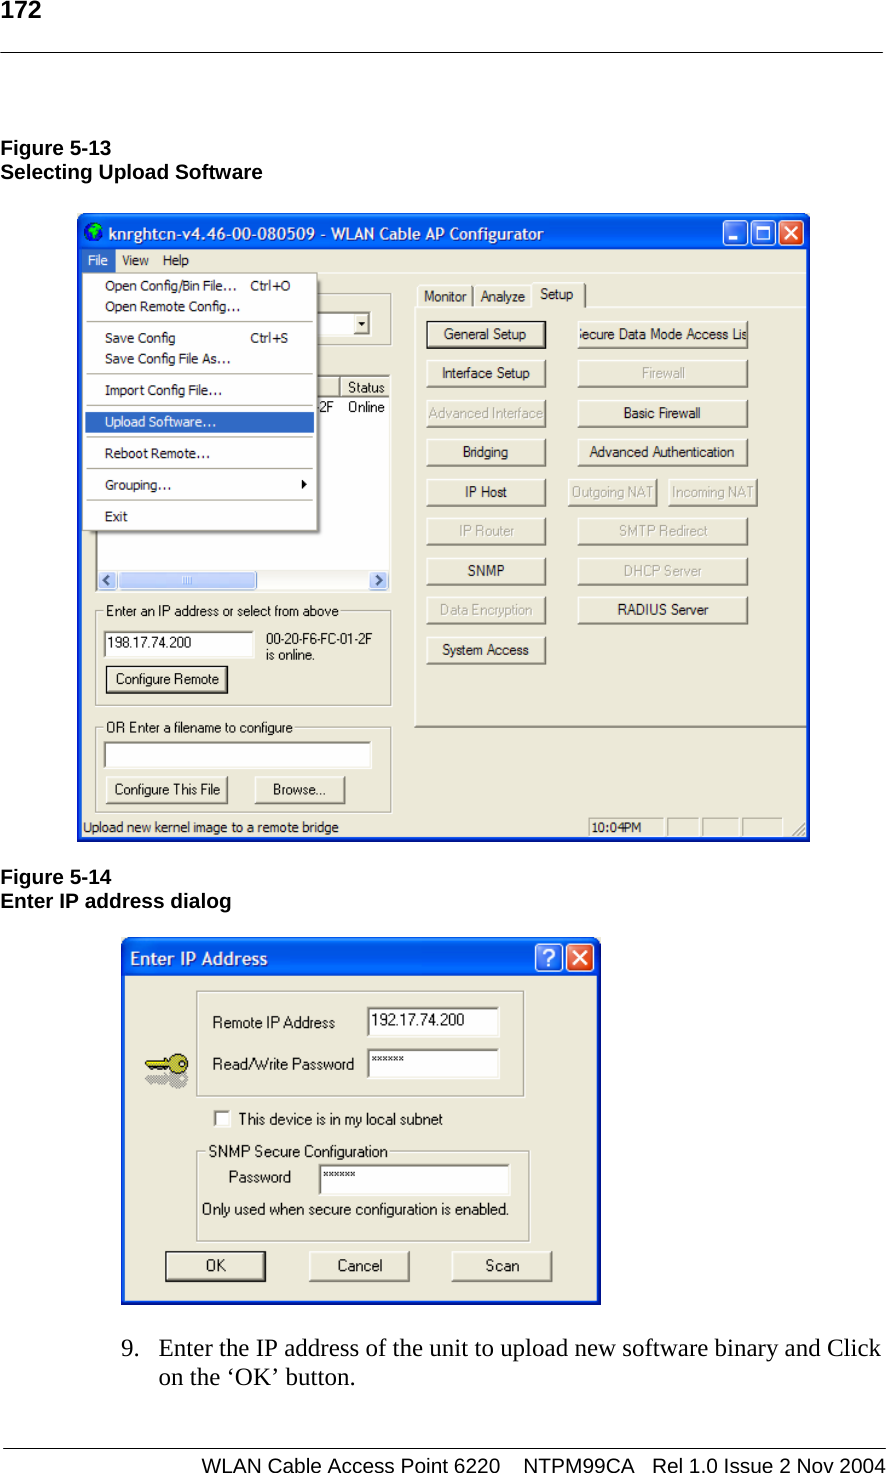   172    WLAN Cable Access Point 6220    NTPM99CA   Rel 1.0 Issue 2 Nov 2004  Figure 5-13 Selecting Upload Software     Figure 5-14 Enter IP address dialog    9. Enter the IP address of the unit to upload new software binary and Click on the ‘OK’ button.   